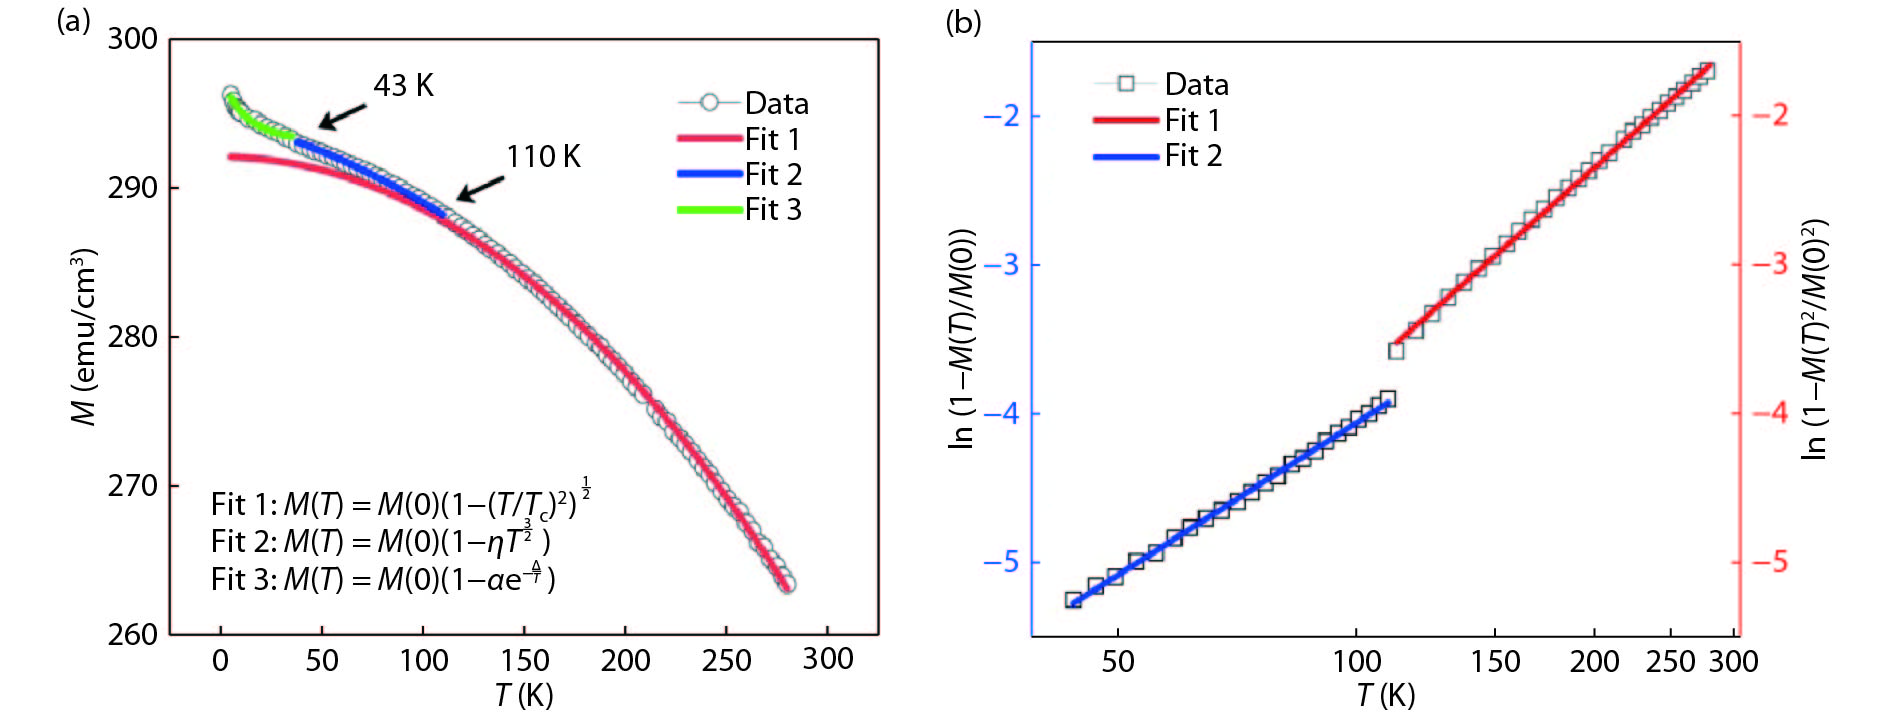 (Color online) T dependence of M varying from 5 to 280 K. (a) The fitting curves using T2, T3/2 and exponential dependences in different T regions are plotted in red, blue and green lines, respectively. The formulas describing M(T) in corresponding T regions are shown. (b) The linear relations of ln(1–M(T)2/M(0)2) (red line) and ln(1–M(T)/M(0)) (blue line) versus T.